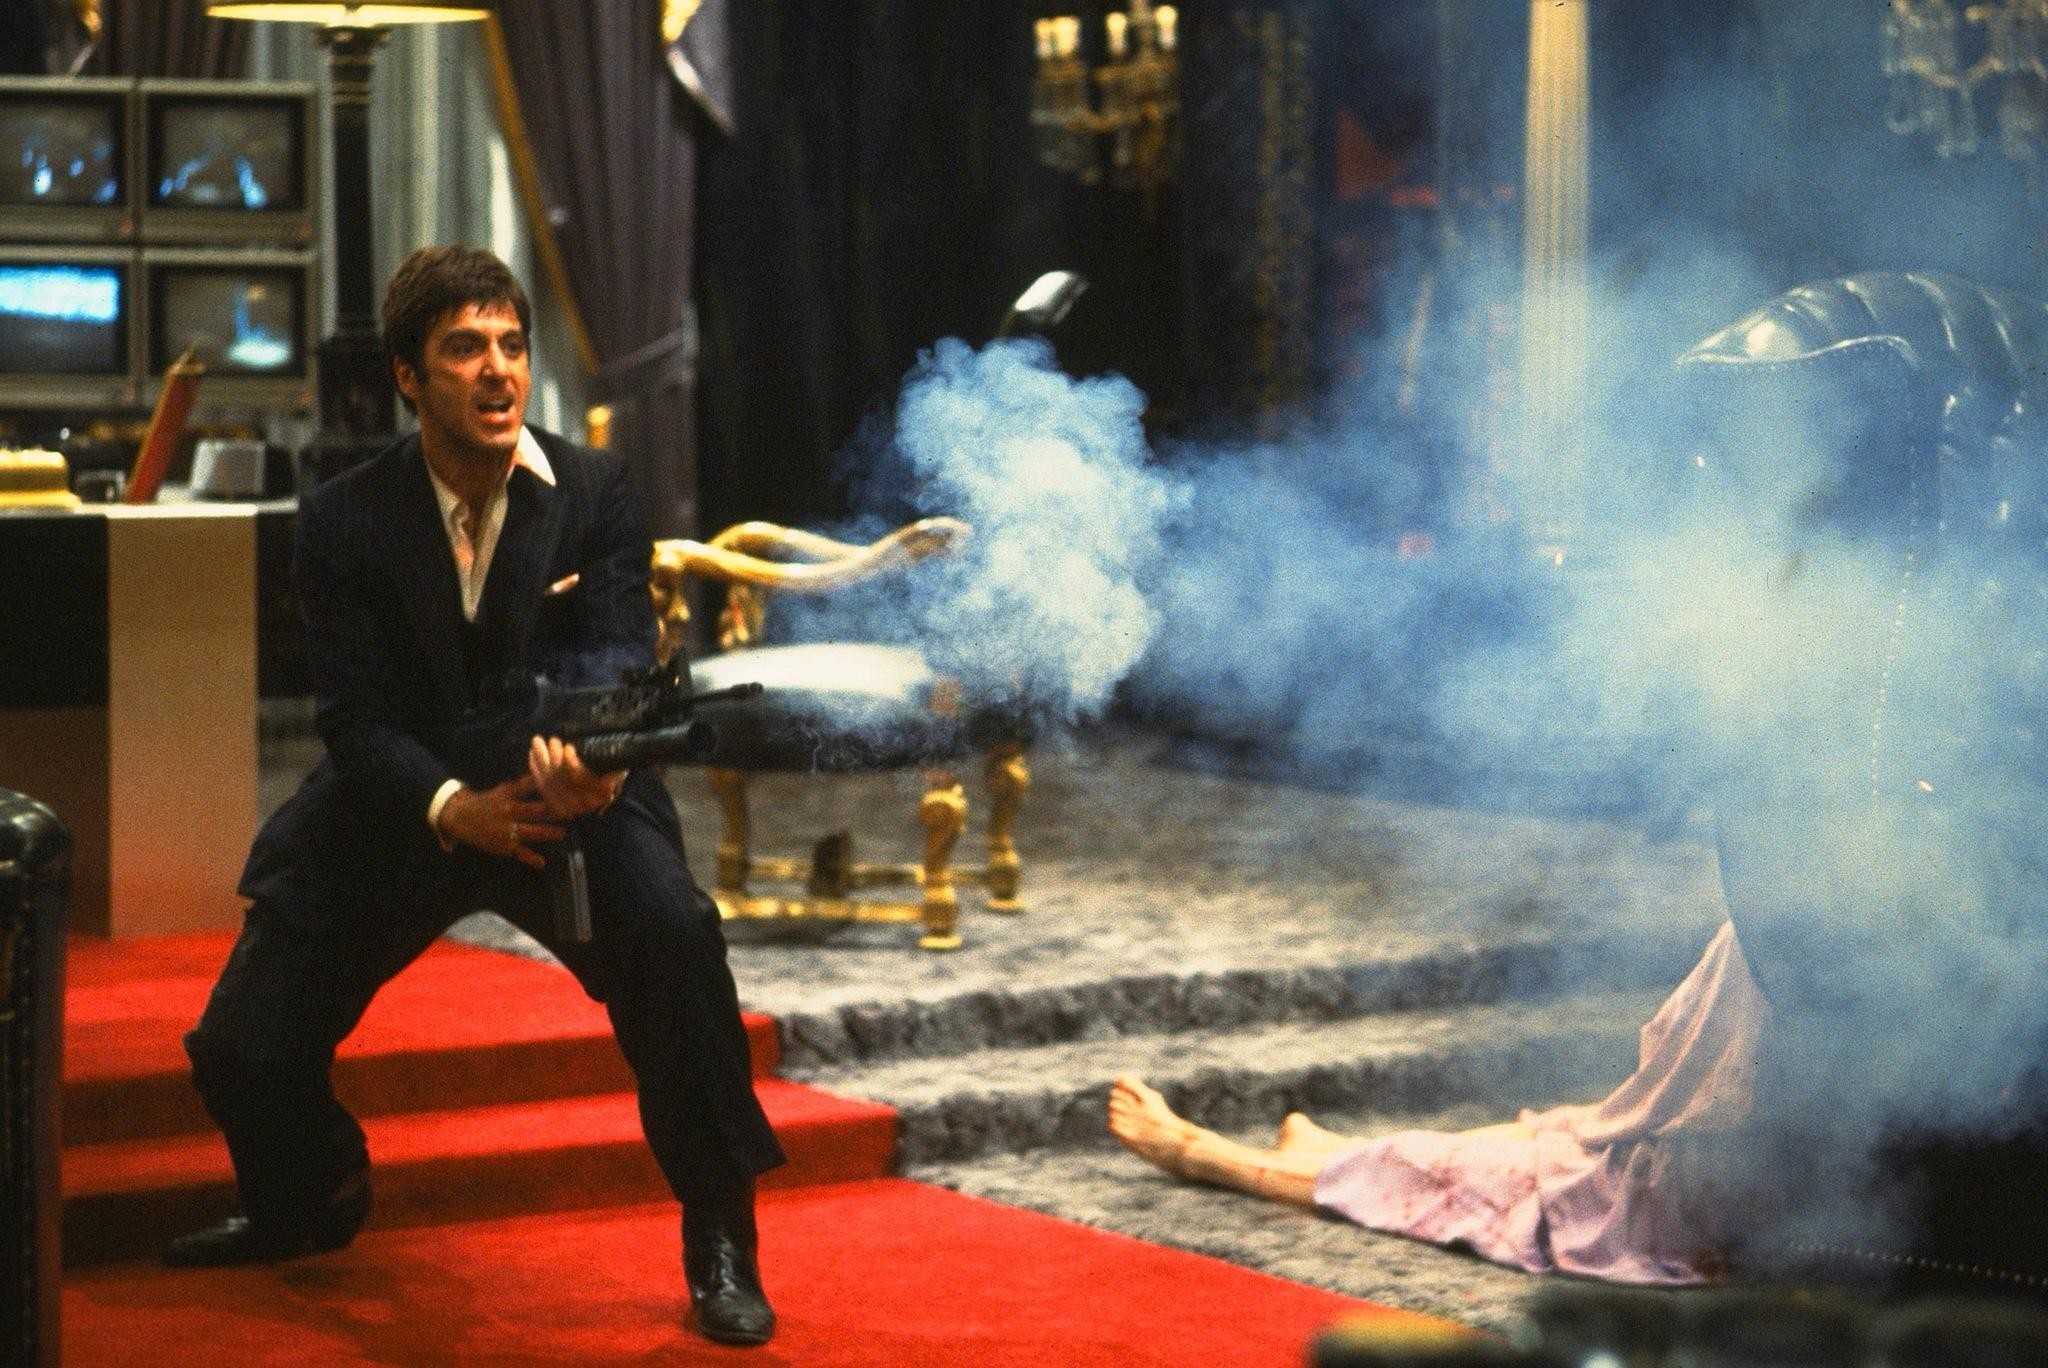 2048x1368 Explore Scarface Movie, Scarface Quotes, and more!